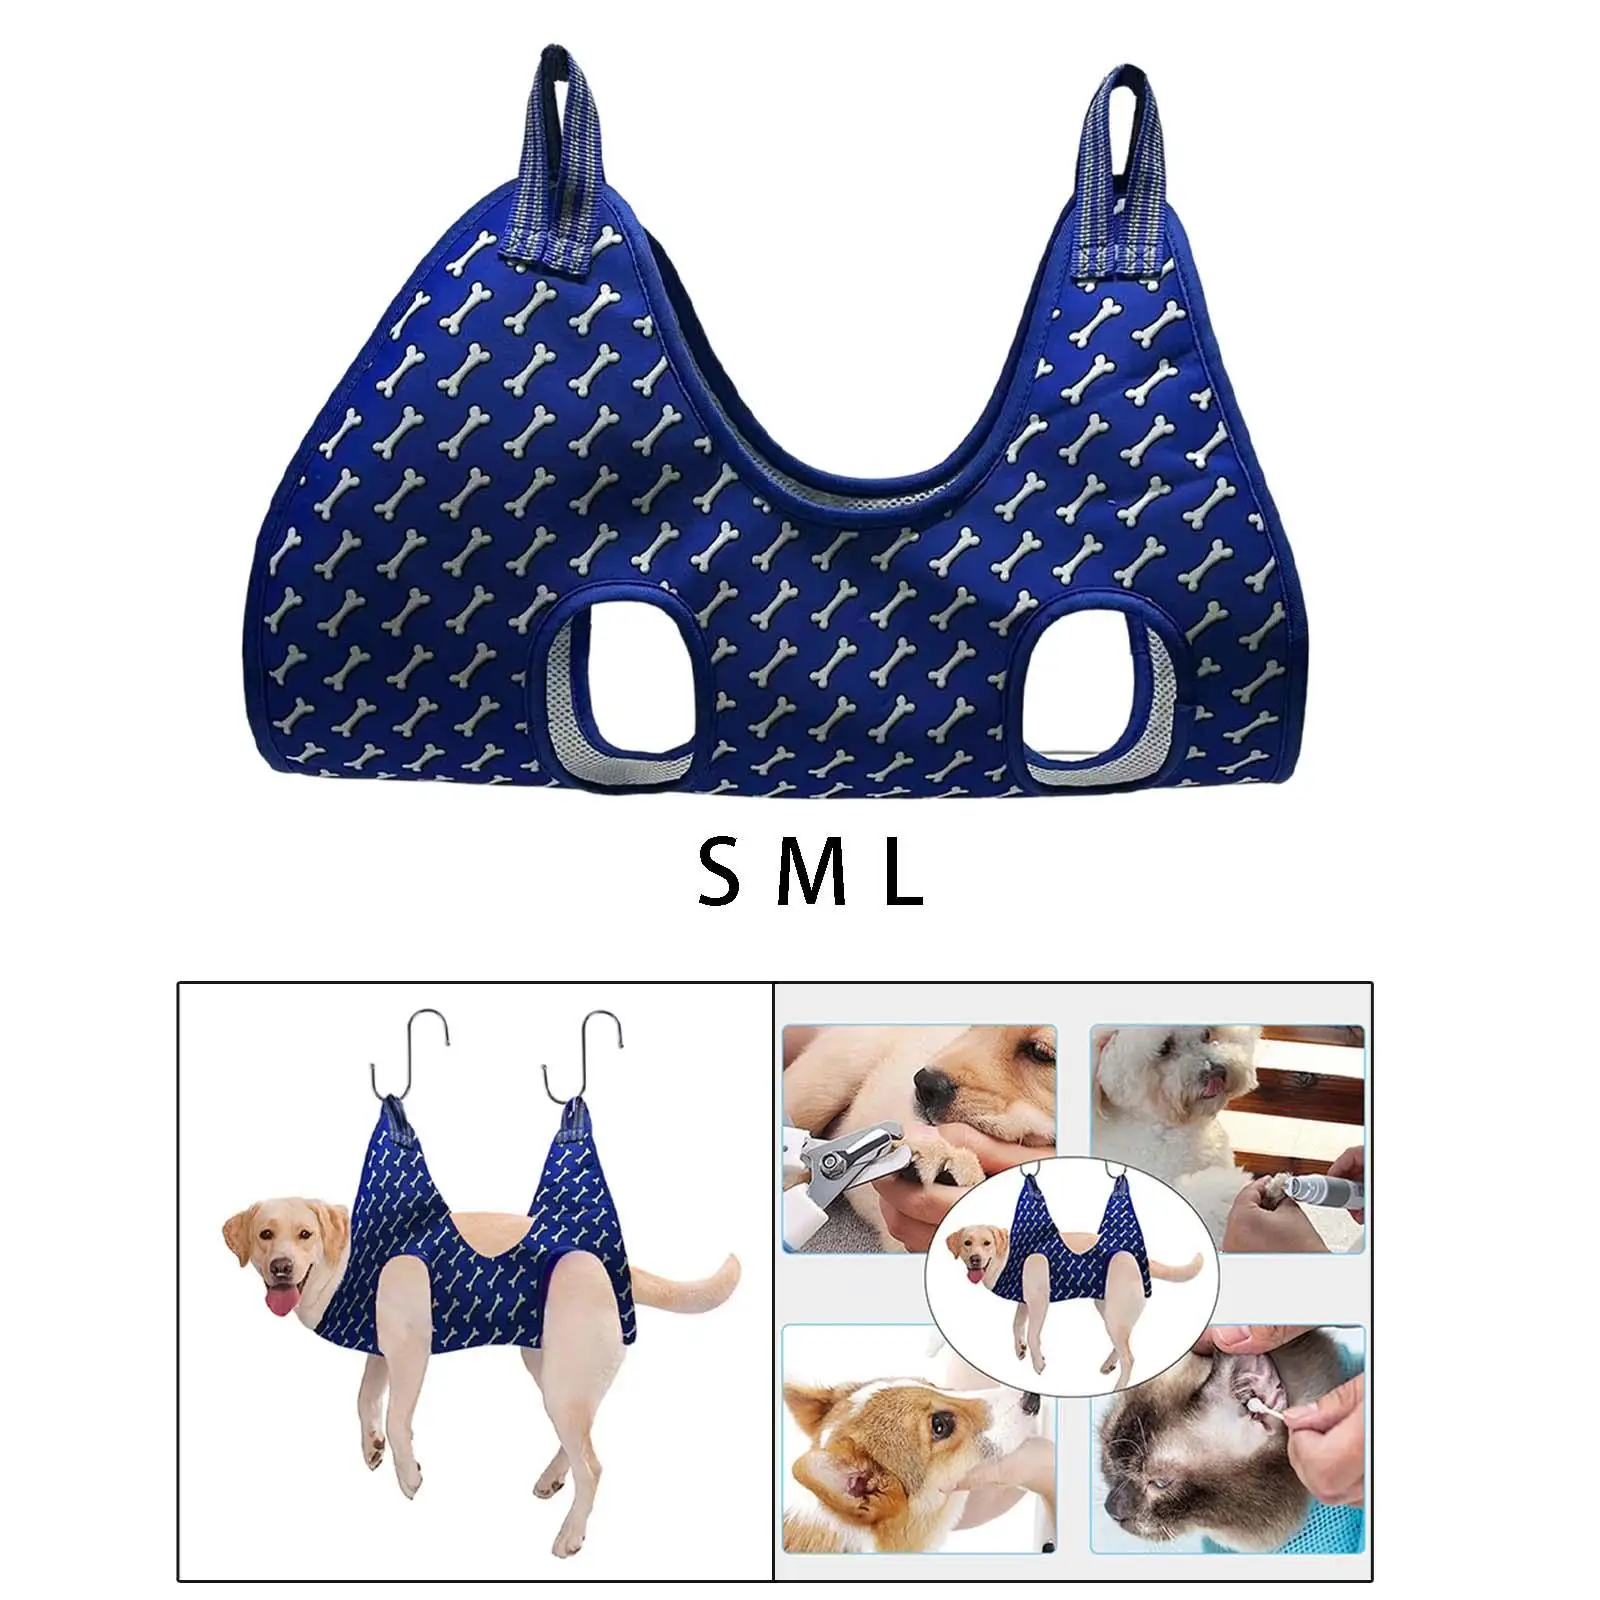 Dog Hammock for Grooming, Dog Grooming Sling Dog Sling for Nail Clipping Dog Lift Harness for Pet Dogs